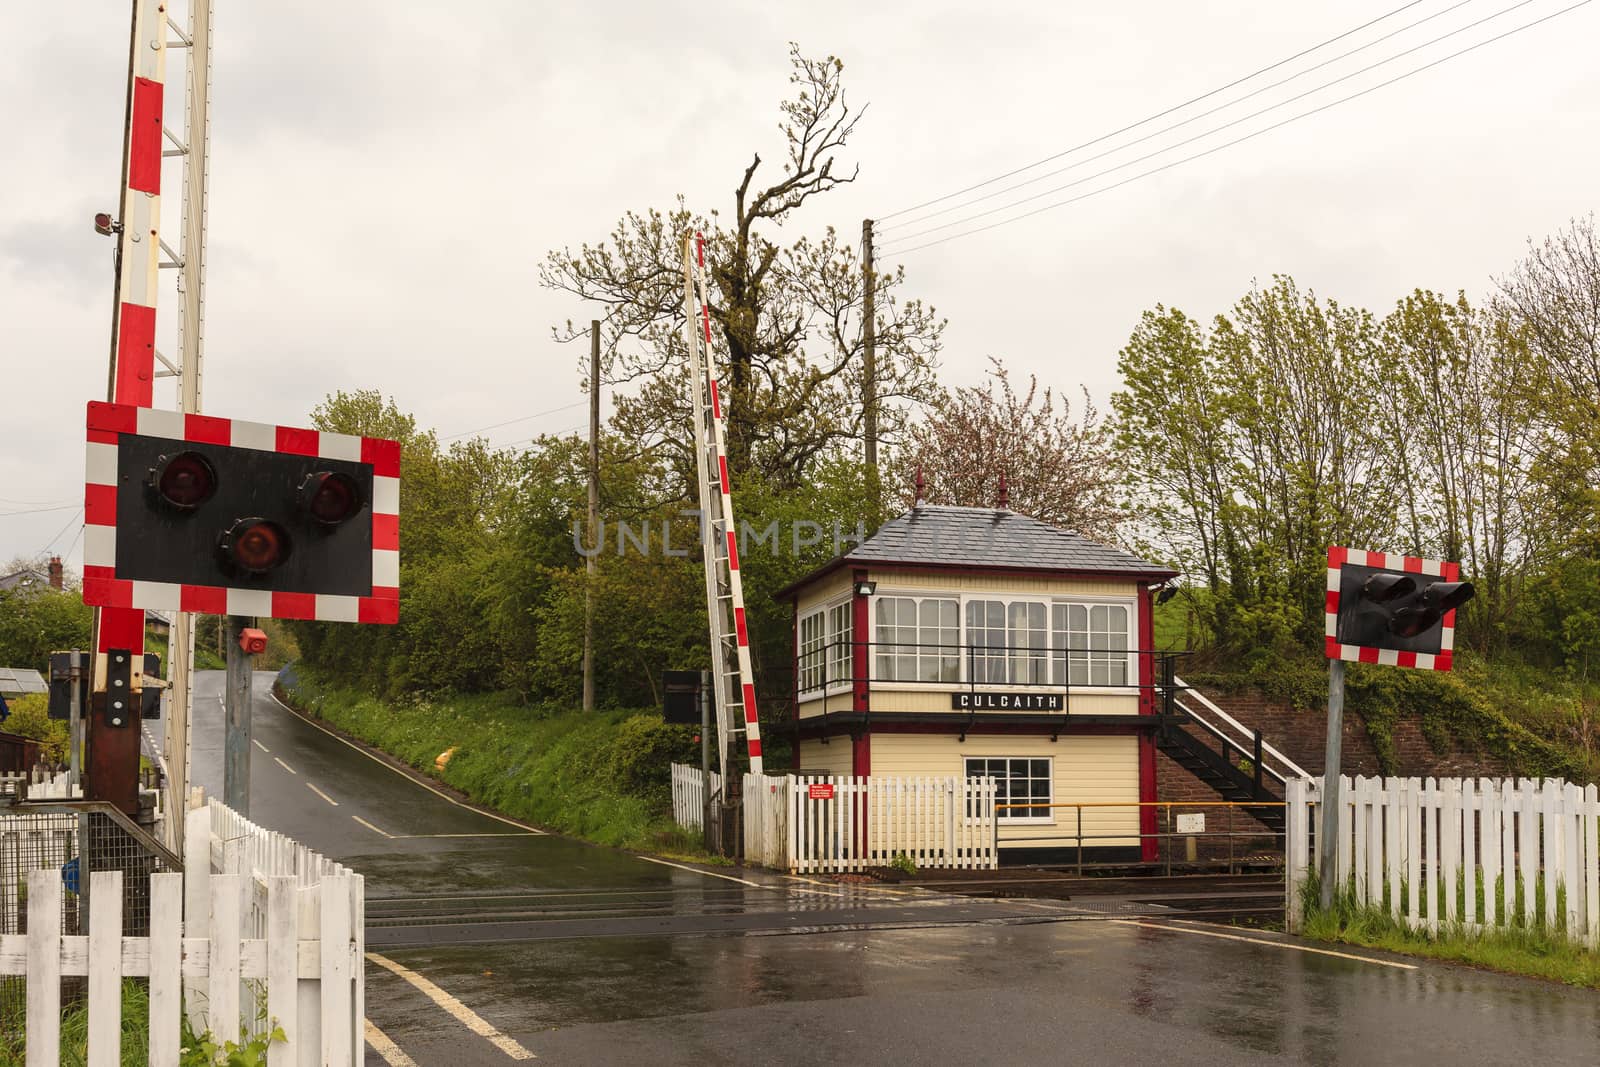 A railway crossing and traditional railway signal box at Culgaith on the historic Settle to Carlisle railway in northern England.